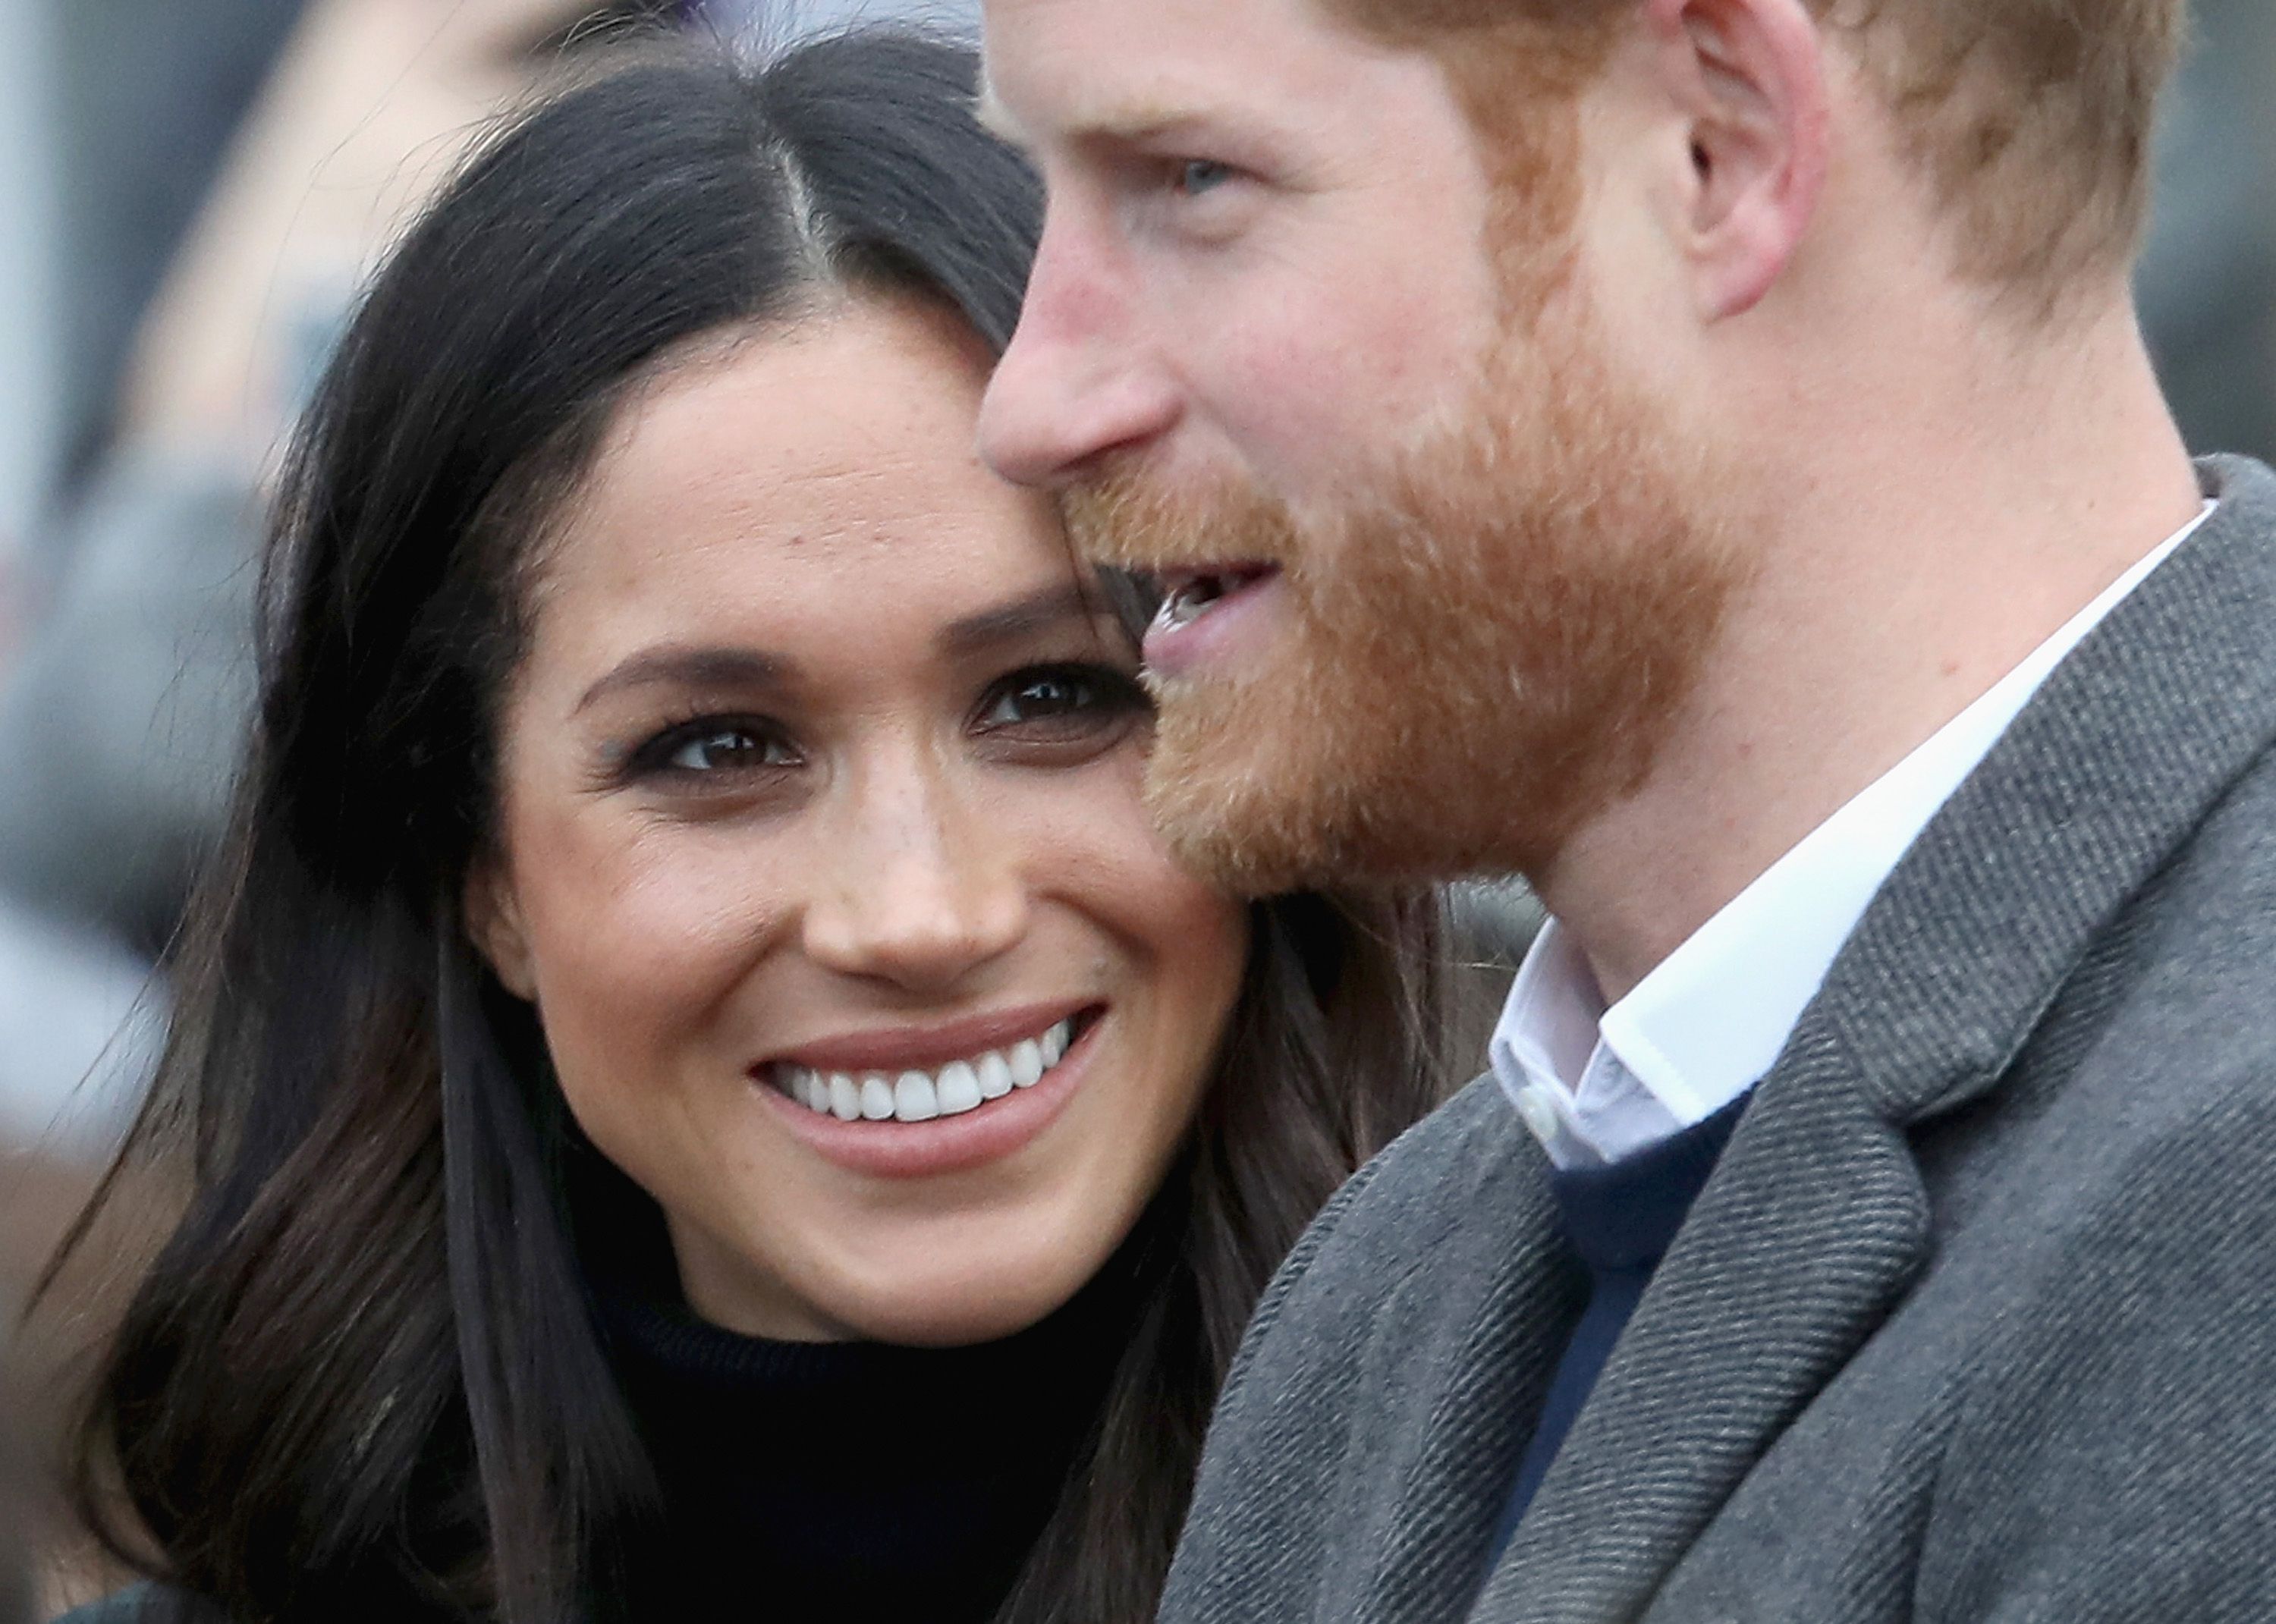 https://hips.hearstapps.com/hmg-prod.s3.amazonaws.com/images/hbz-prince-harry-meghan-markle-cute-moments-gettyimages-917910642-1523378908.jpg?crop=1xw:1xh;center,top